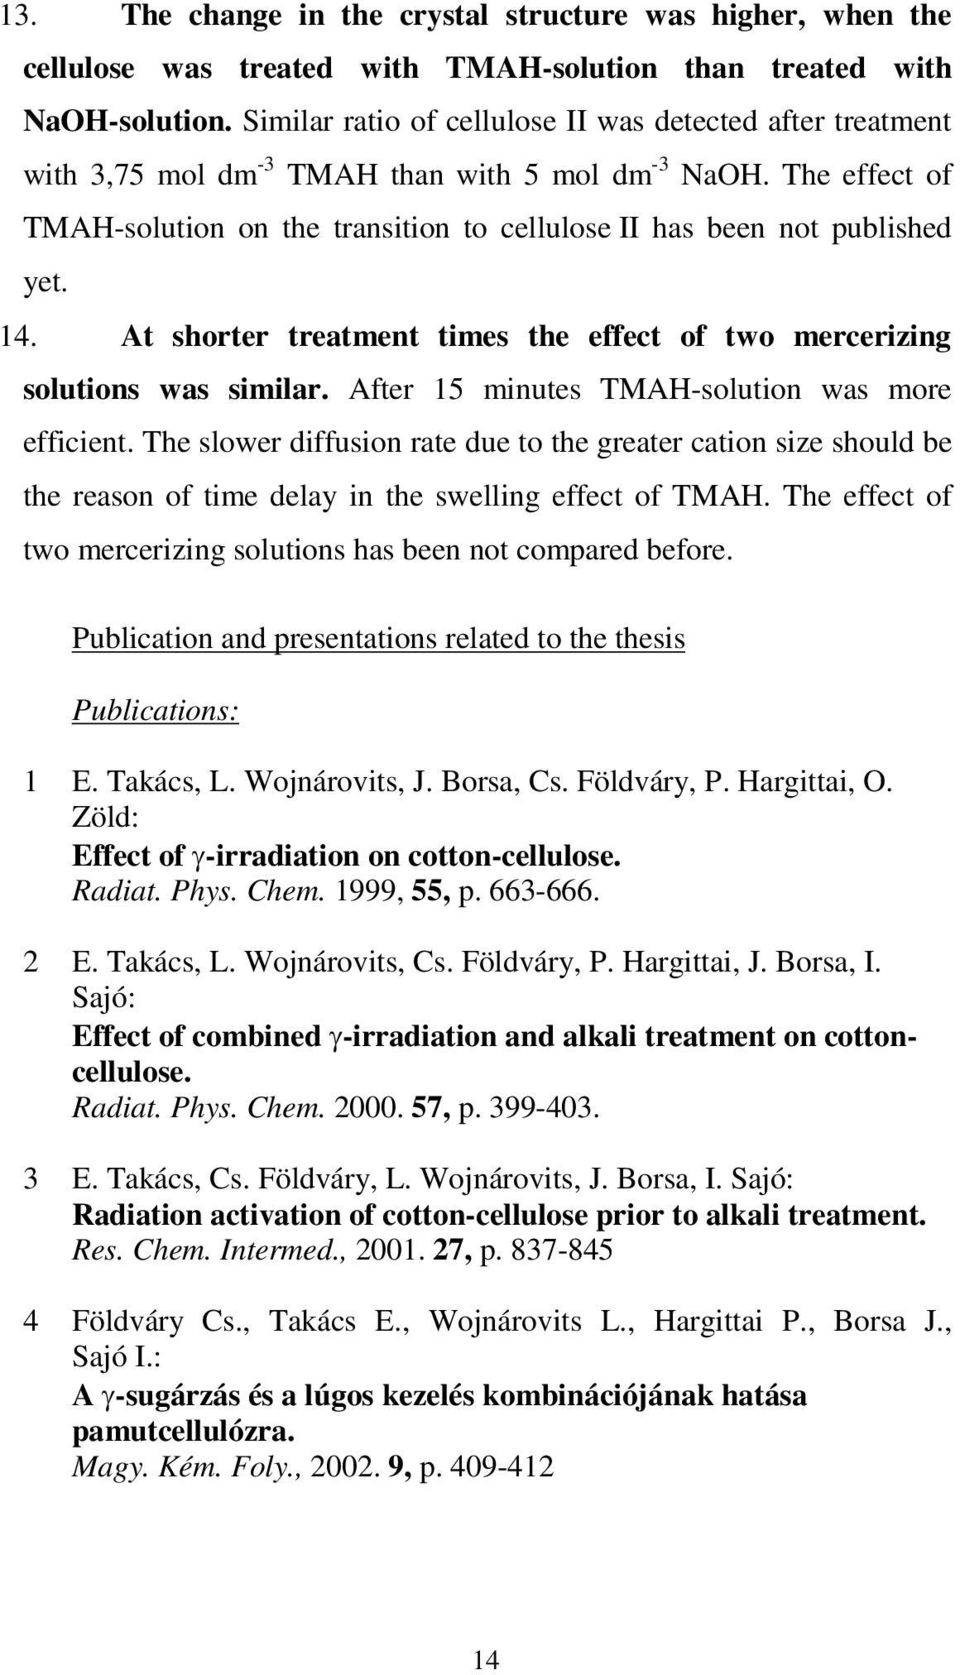 The effect of TMAH-solution on the transition to cellulose II has been not published yet. 14. At shorter treatment times the effect of two mercerizing solutions was similar.